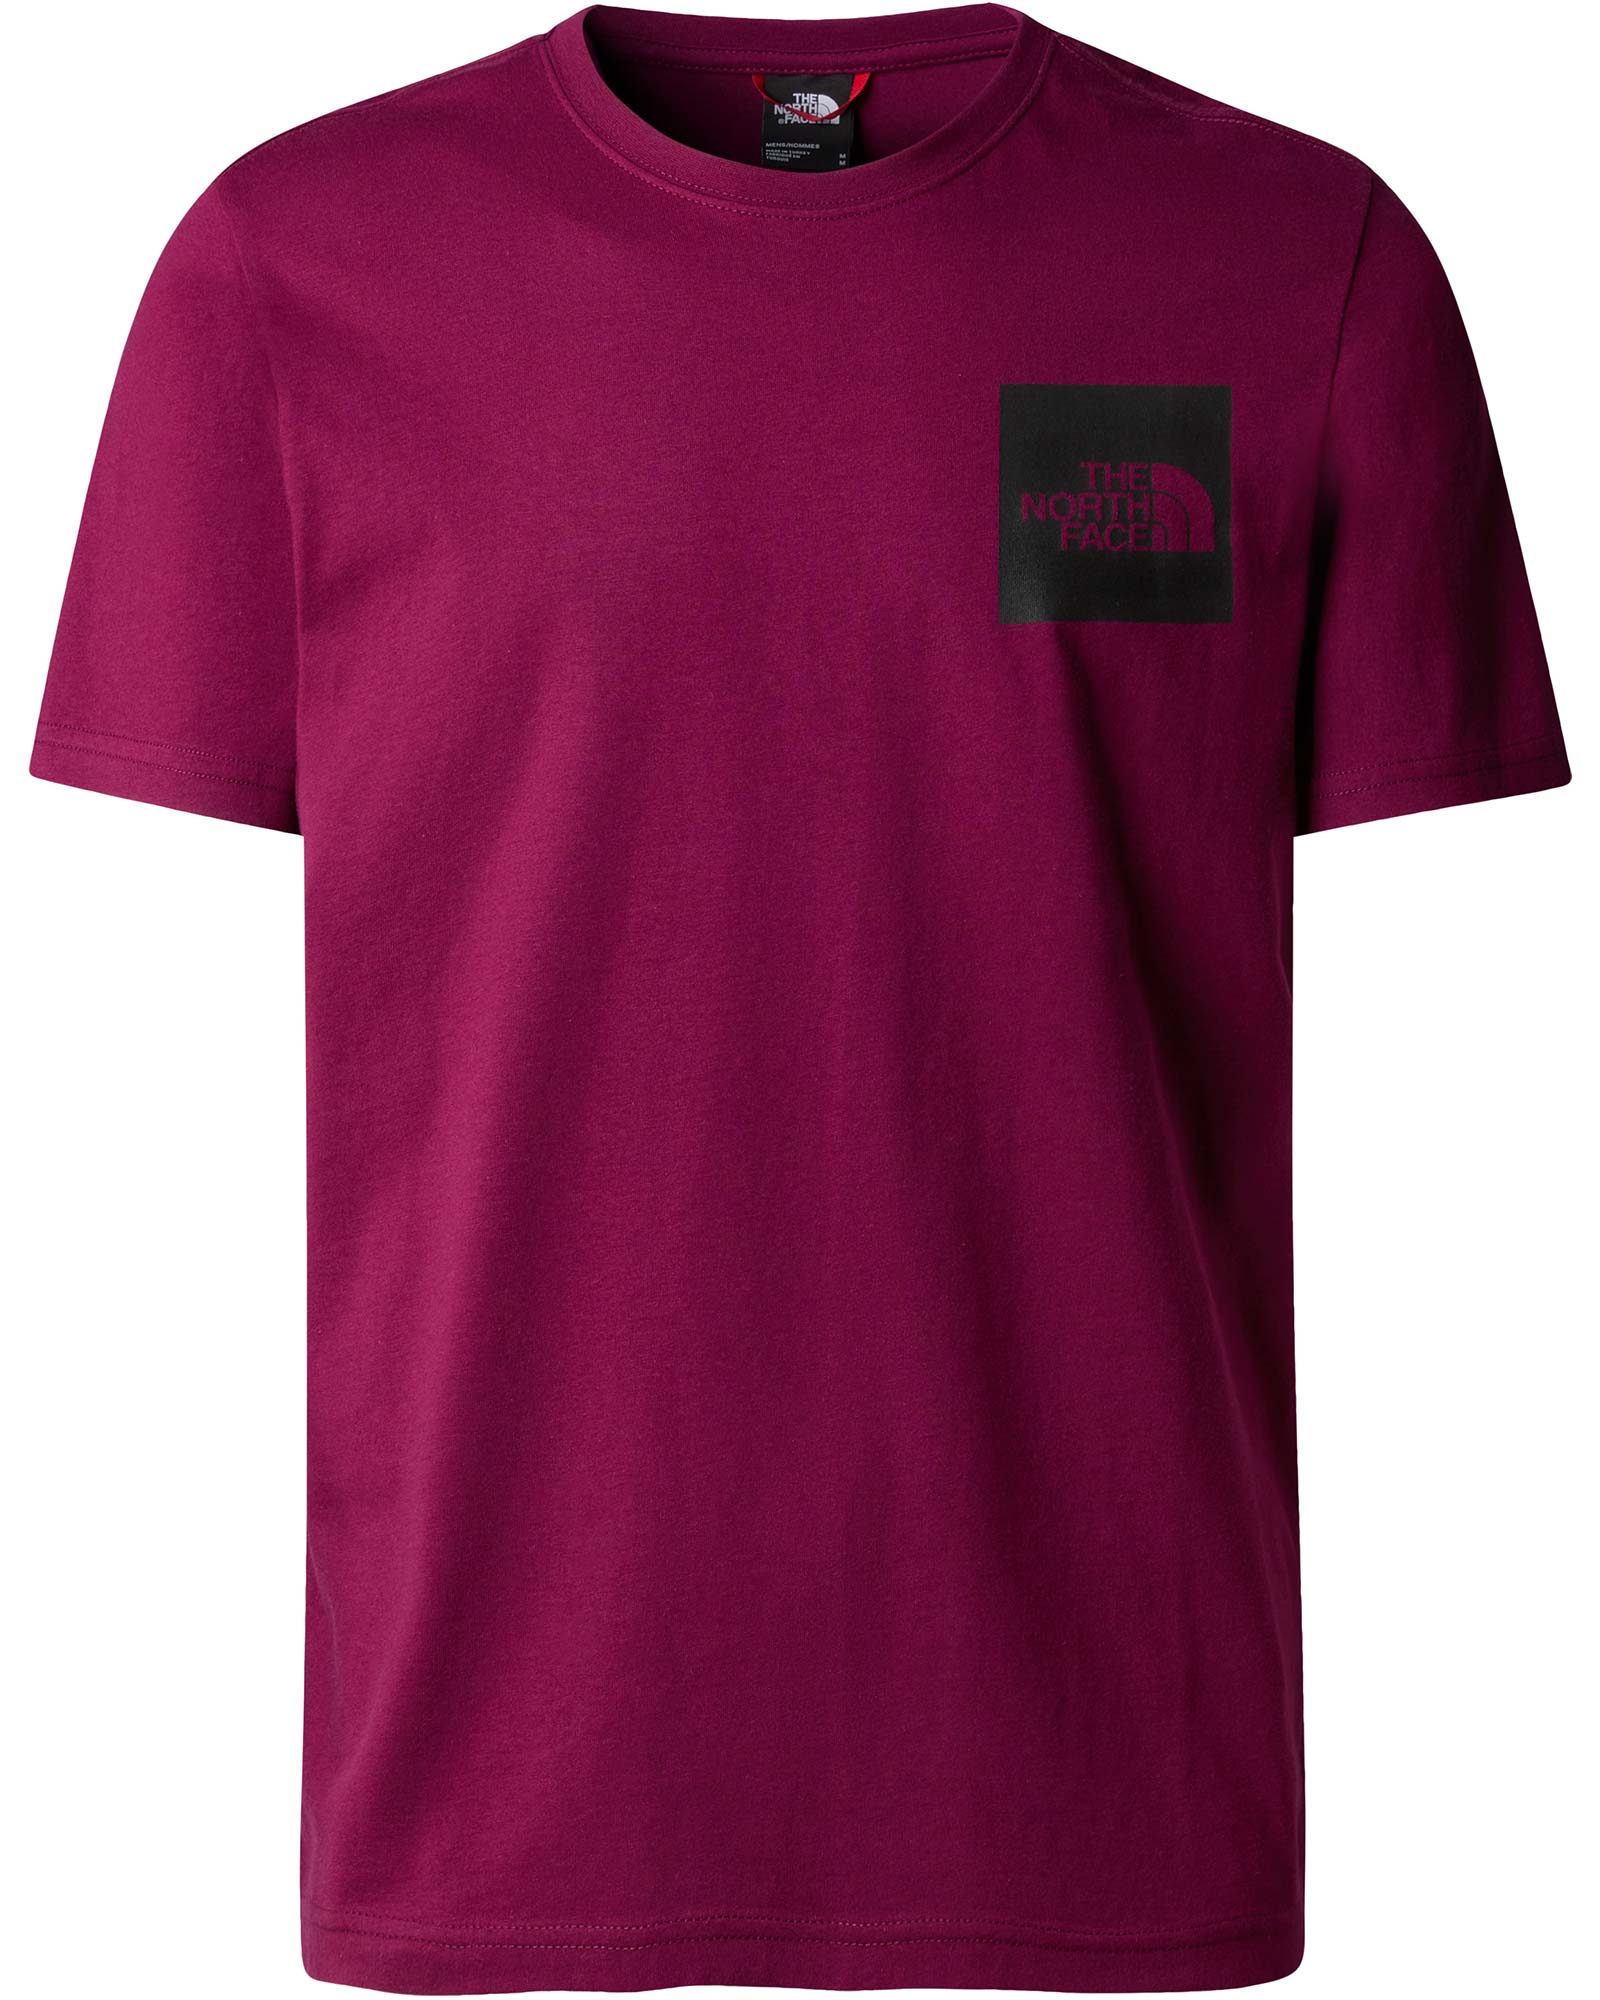 The North Face Fine Men’s Tee - Boysenberry M